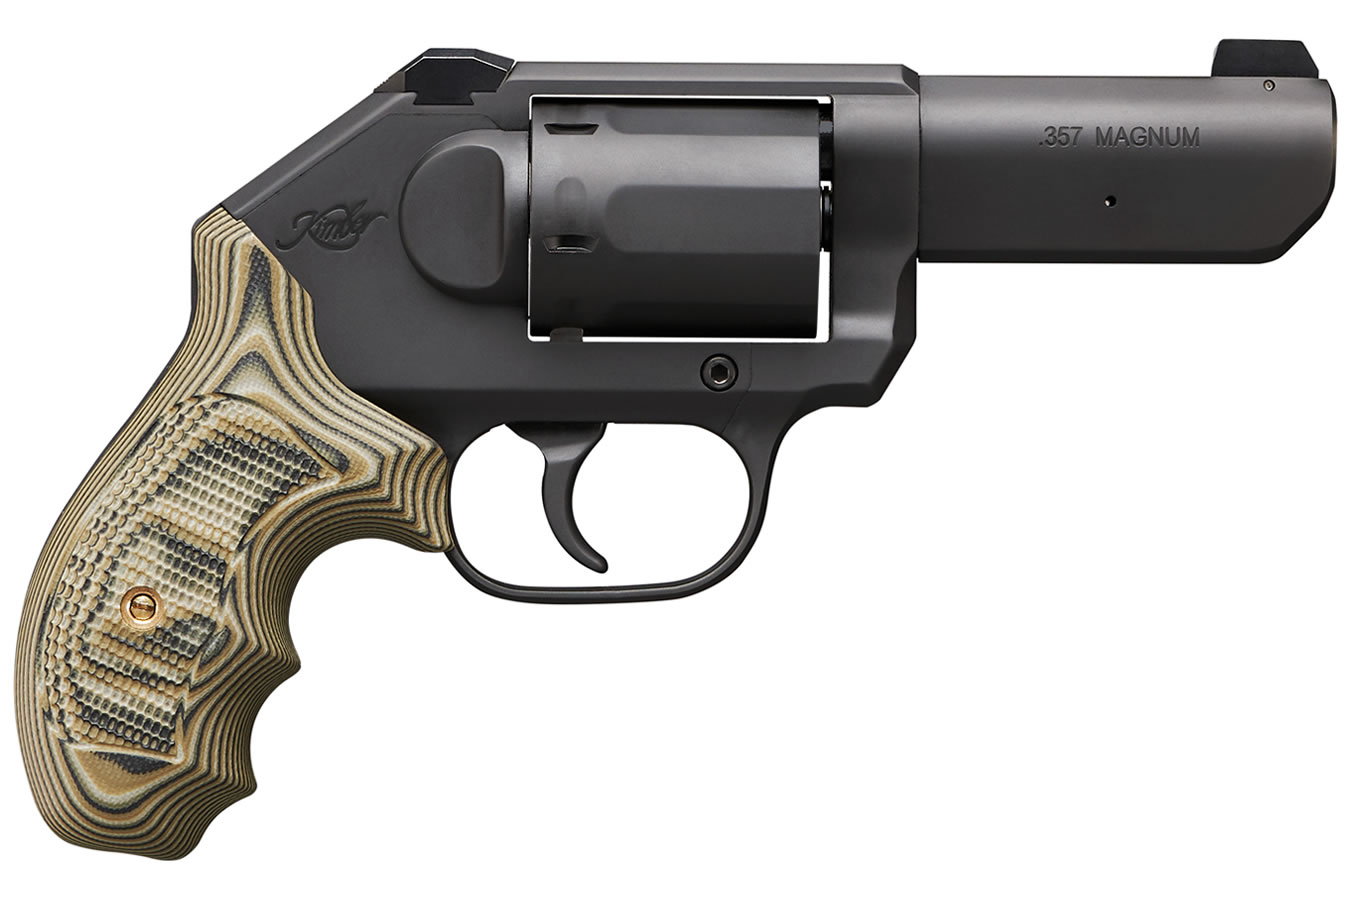 Buy Kimber K6s Tle 357 Magnum Double Action Revolver With 3 Inch Barrel Online For Sale 1847